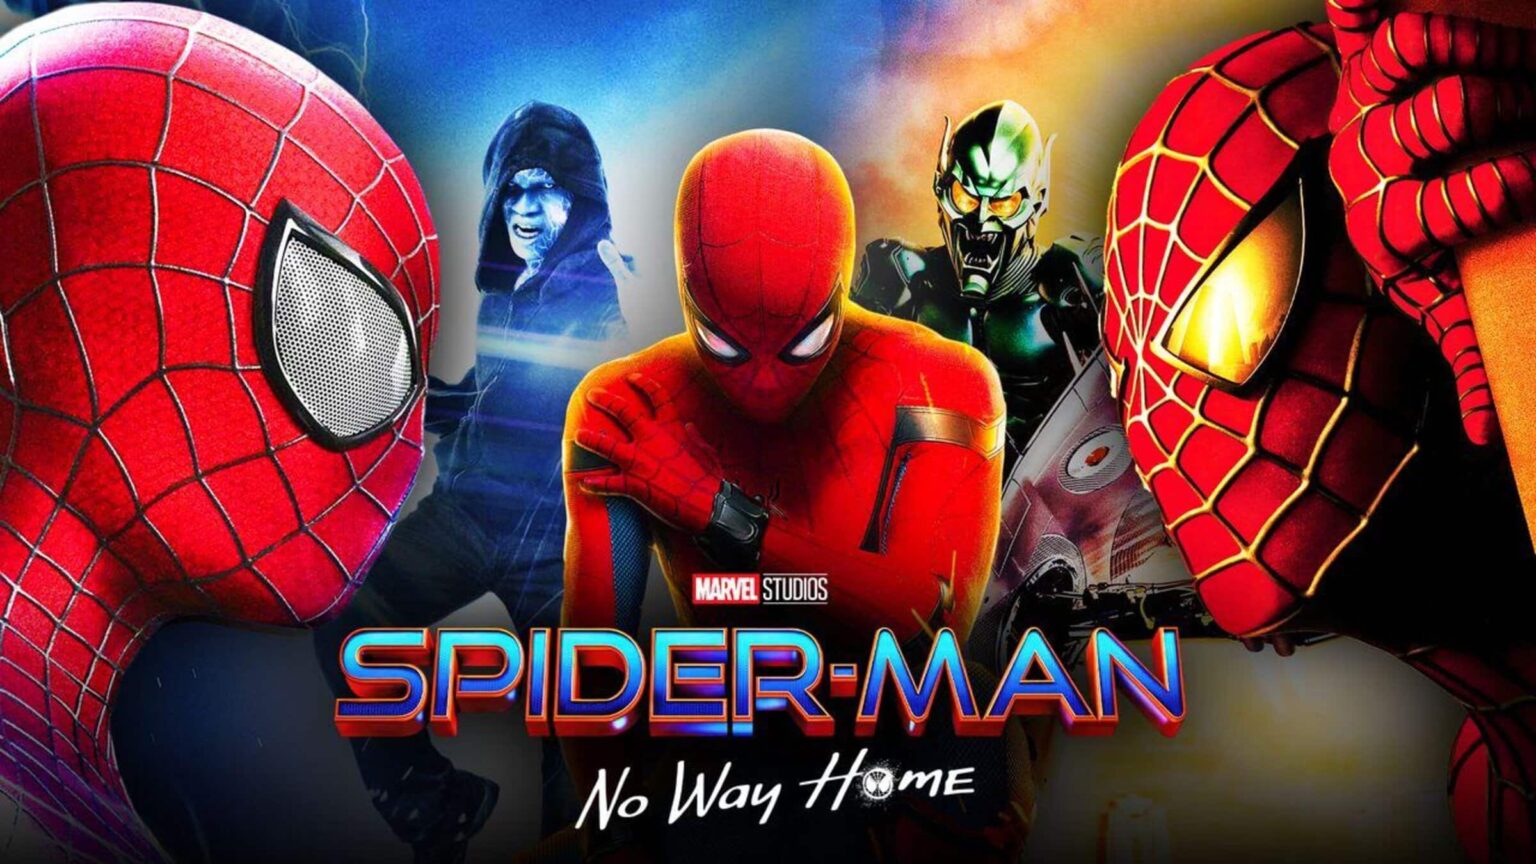 Is it safe to say it’s been a rough couple of years for society? It's time for movie night. When does 'Spider-Man: No Way Home' come to Disney+? Learn now!